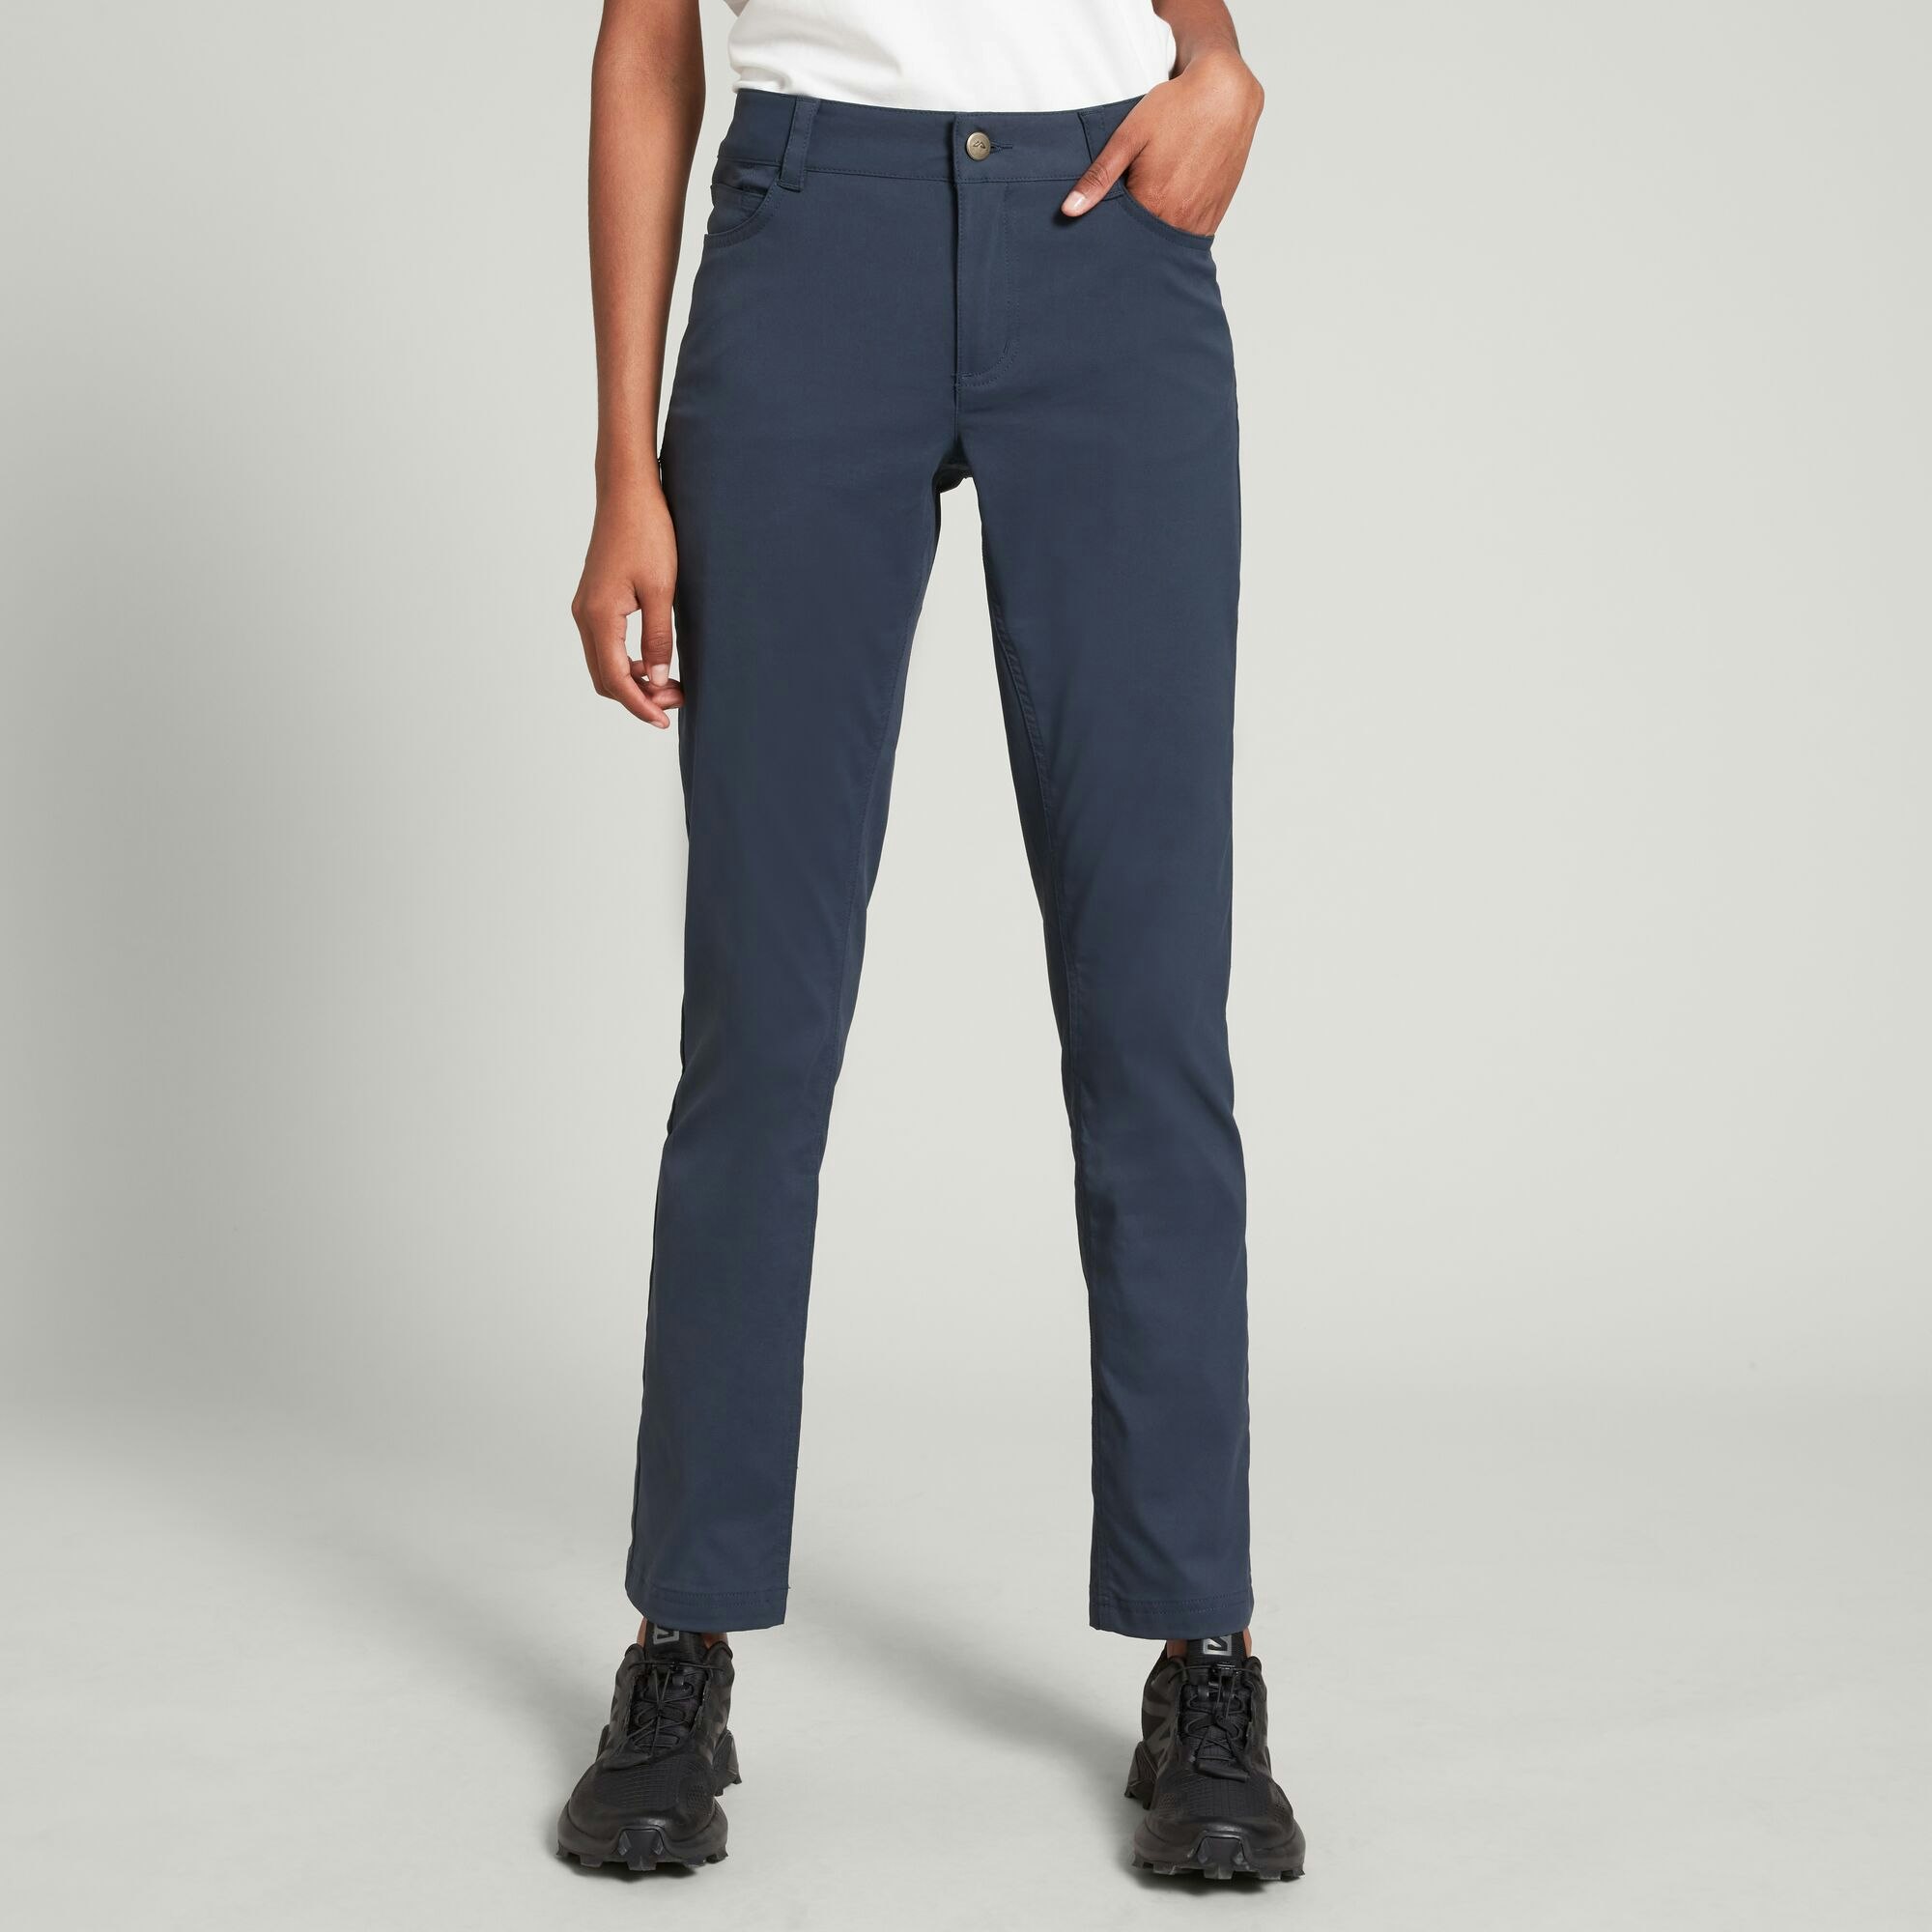 Women Stretch Trousers - Buy Women Stretch Trousers online in India